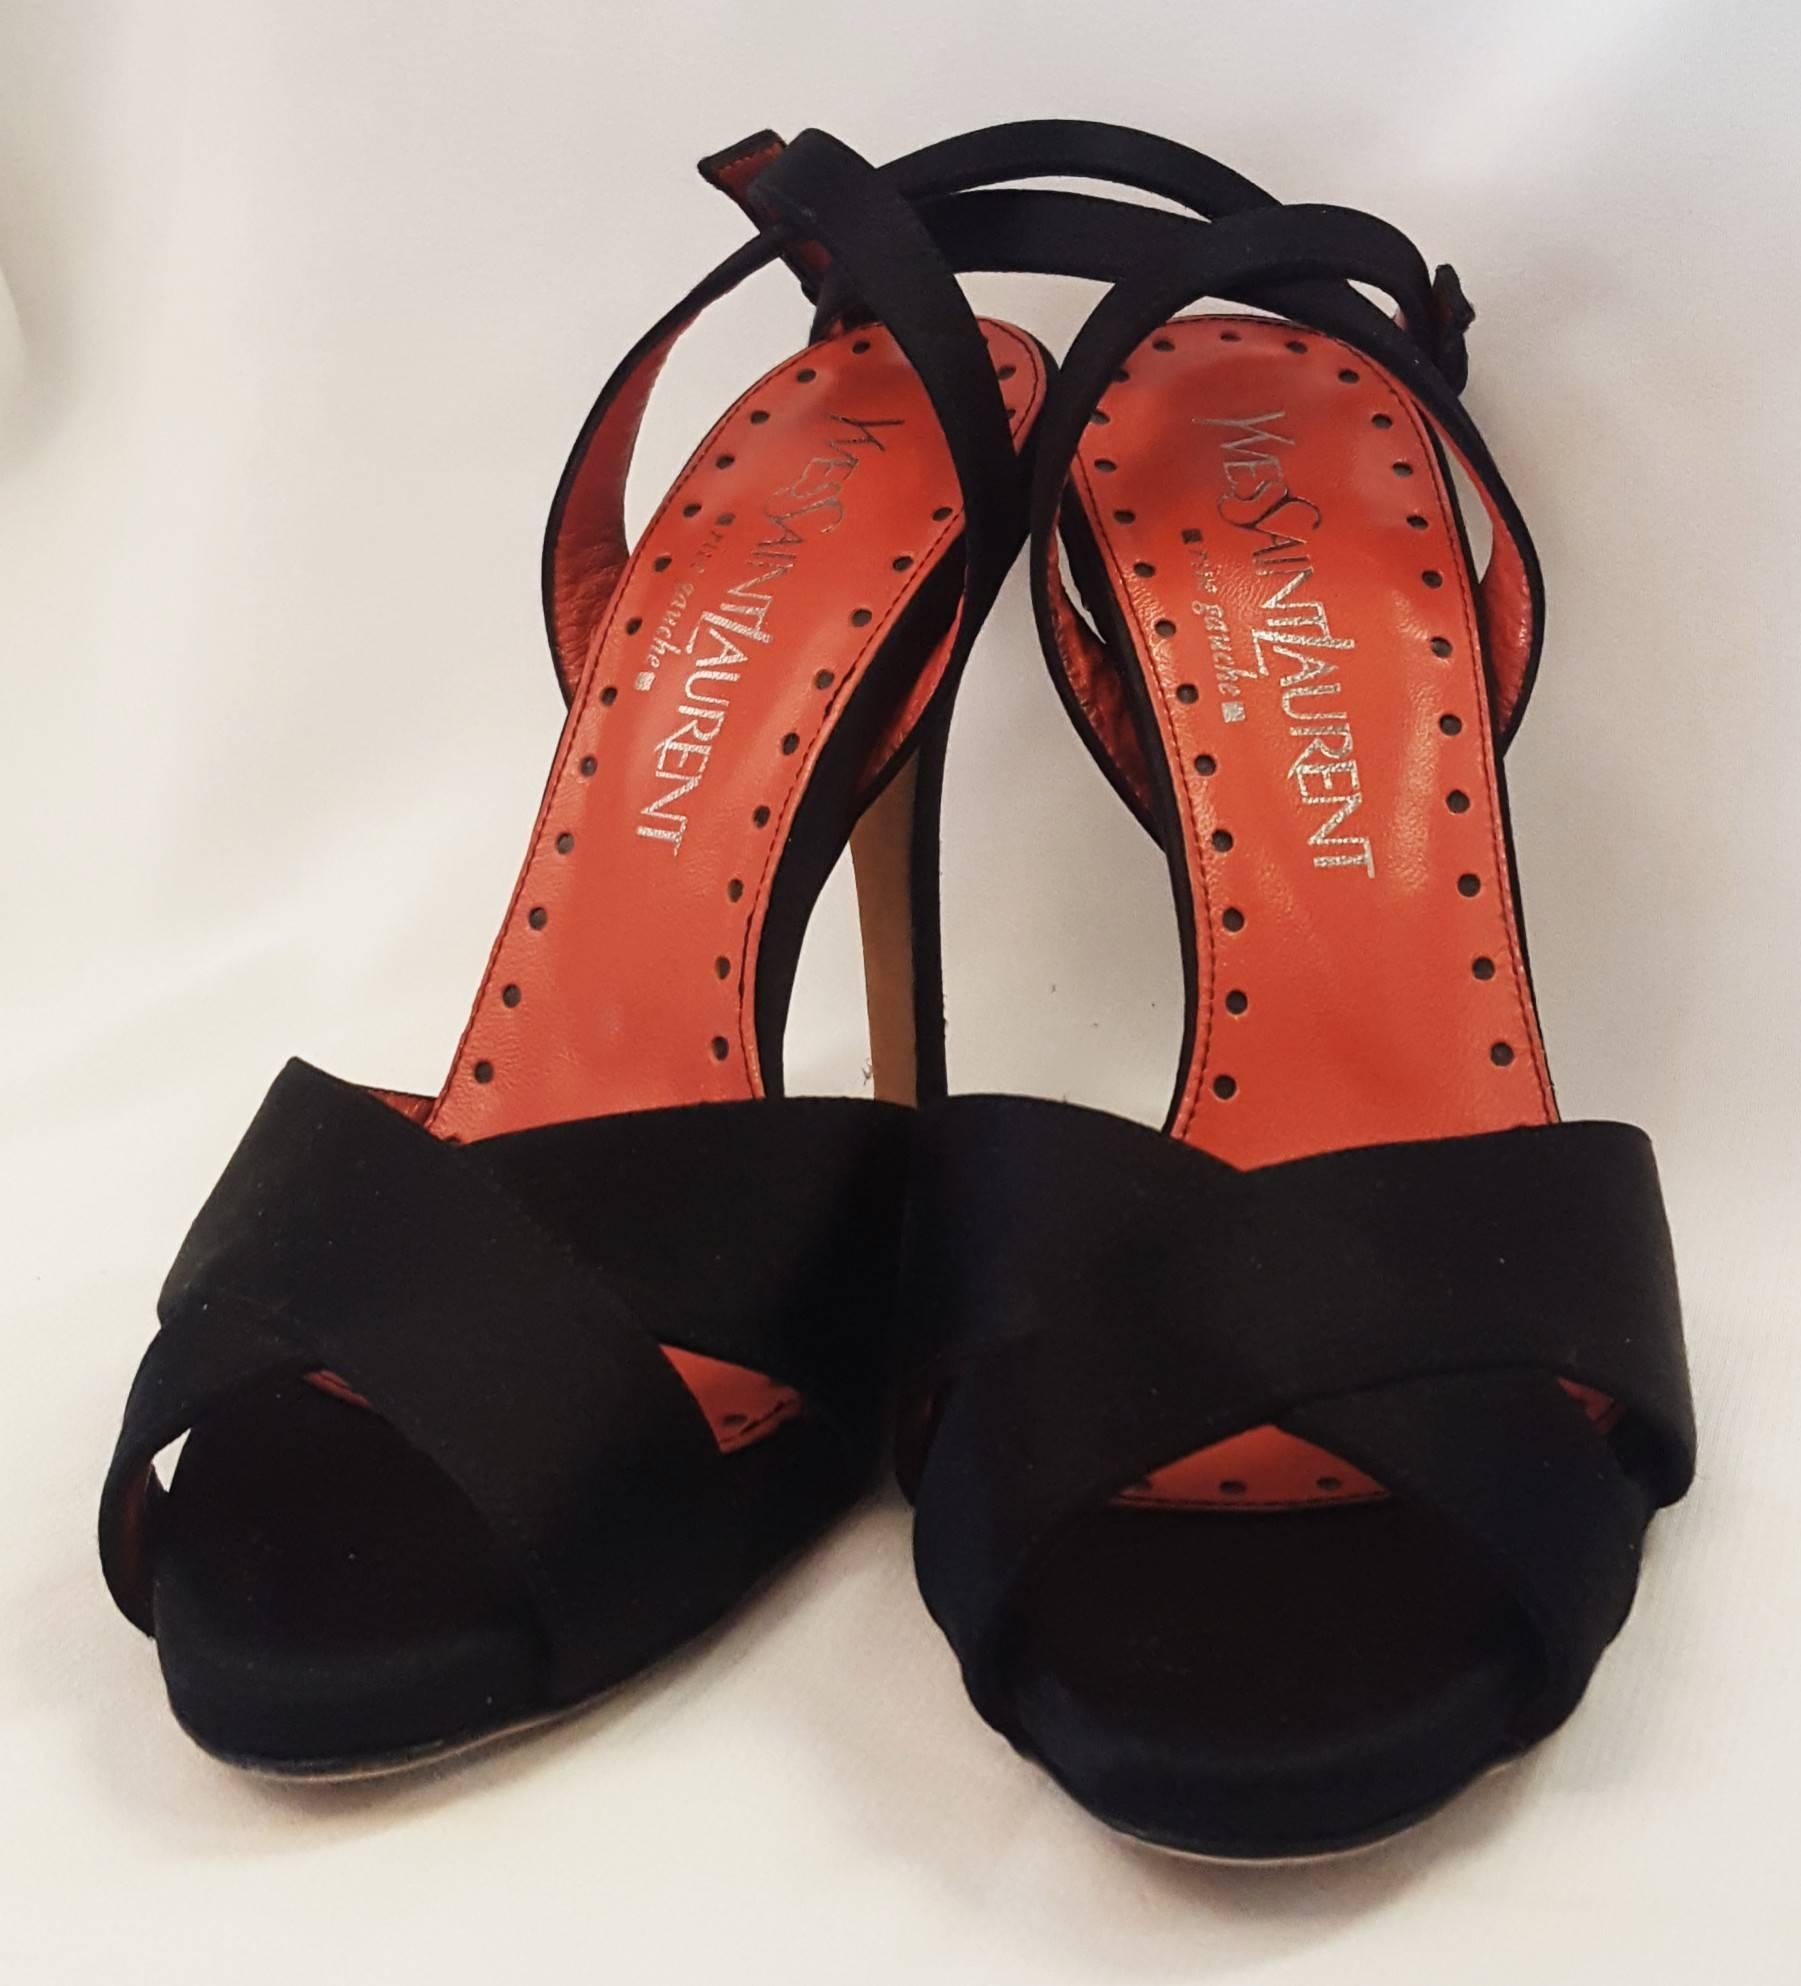 Yves Saint Laurent Black Satin Sandals  In Excellent Condition For Sale In Palm Beach, FL